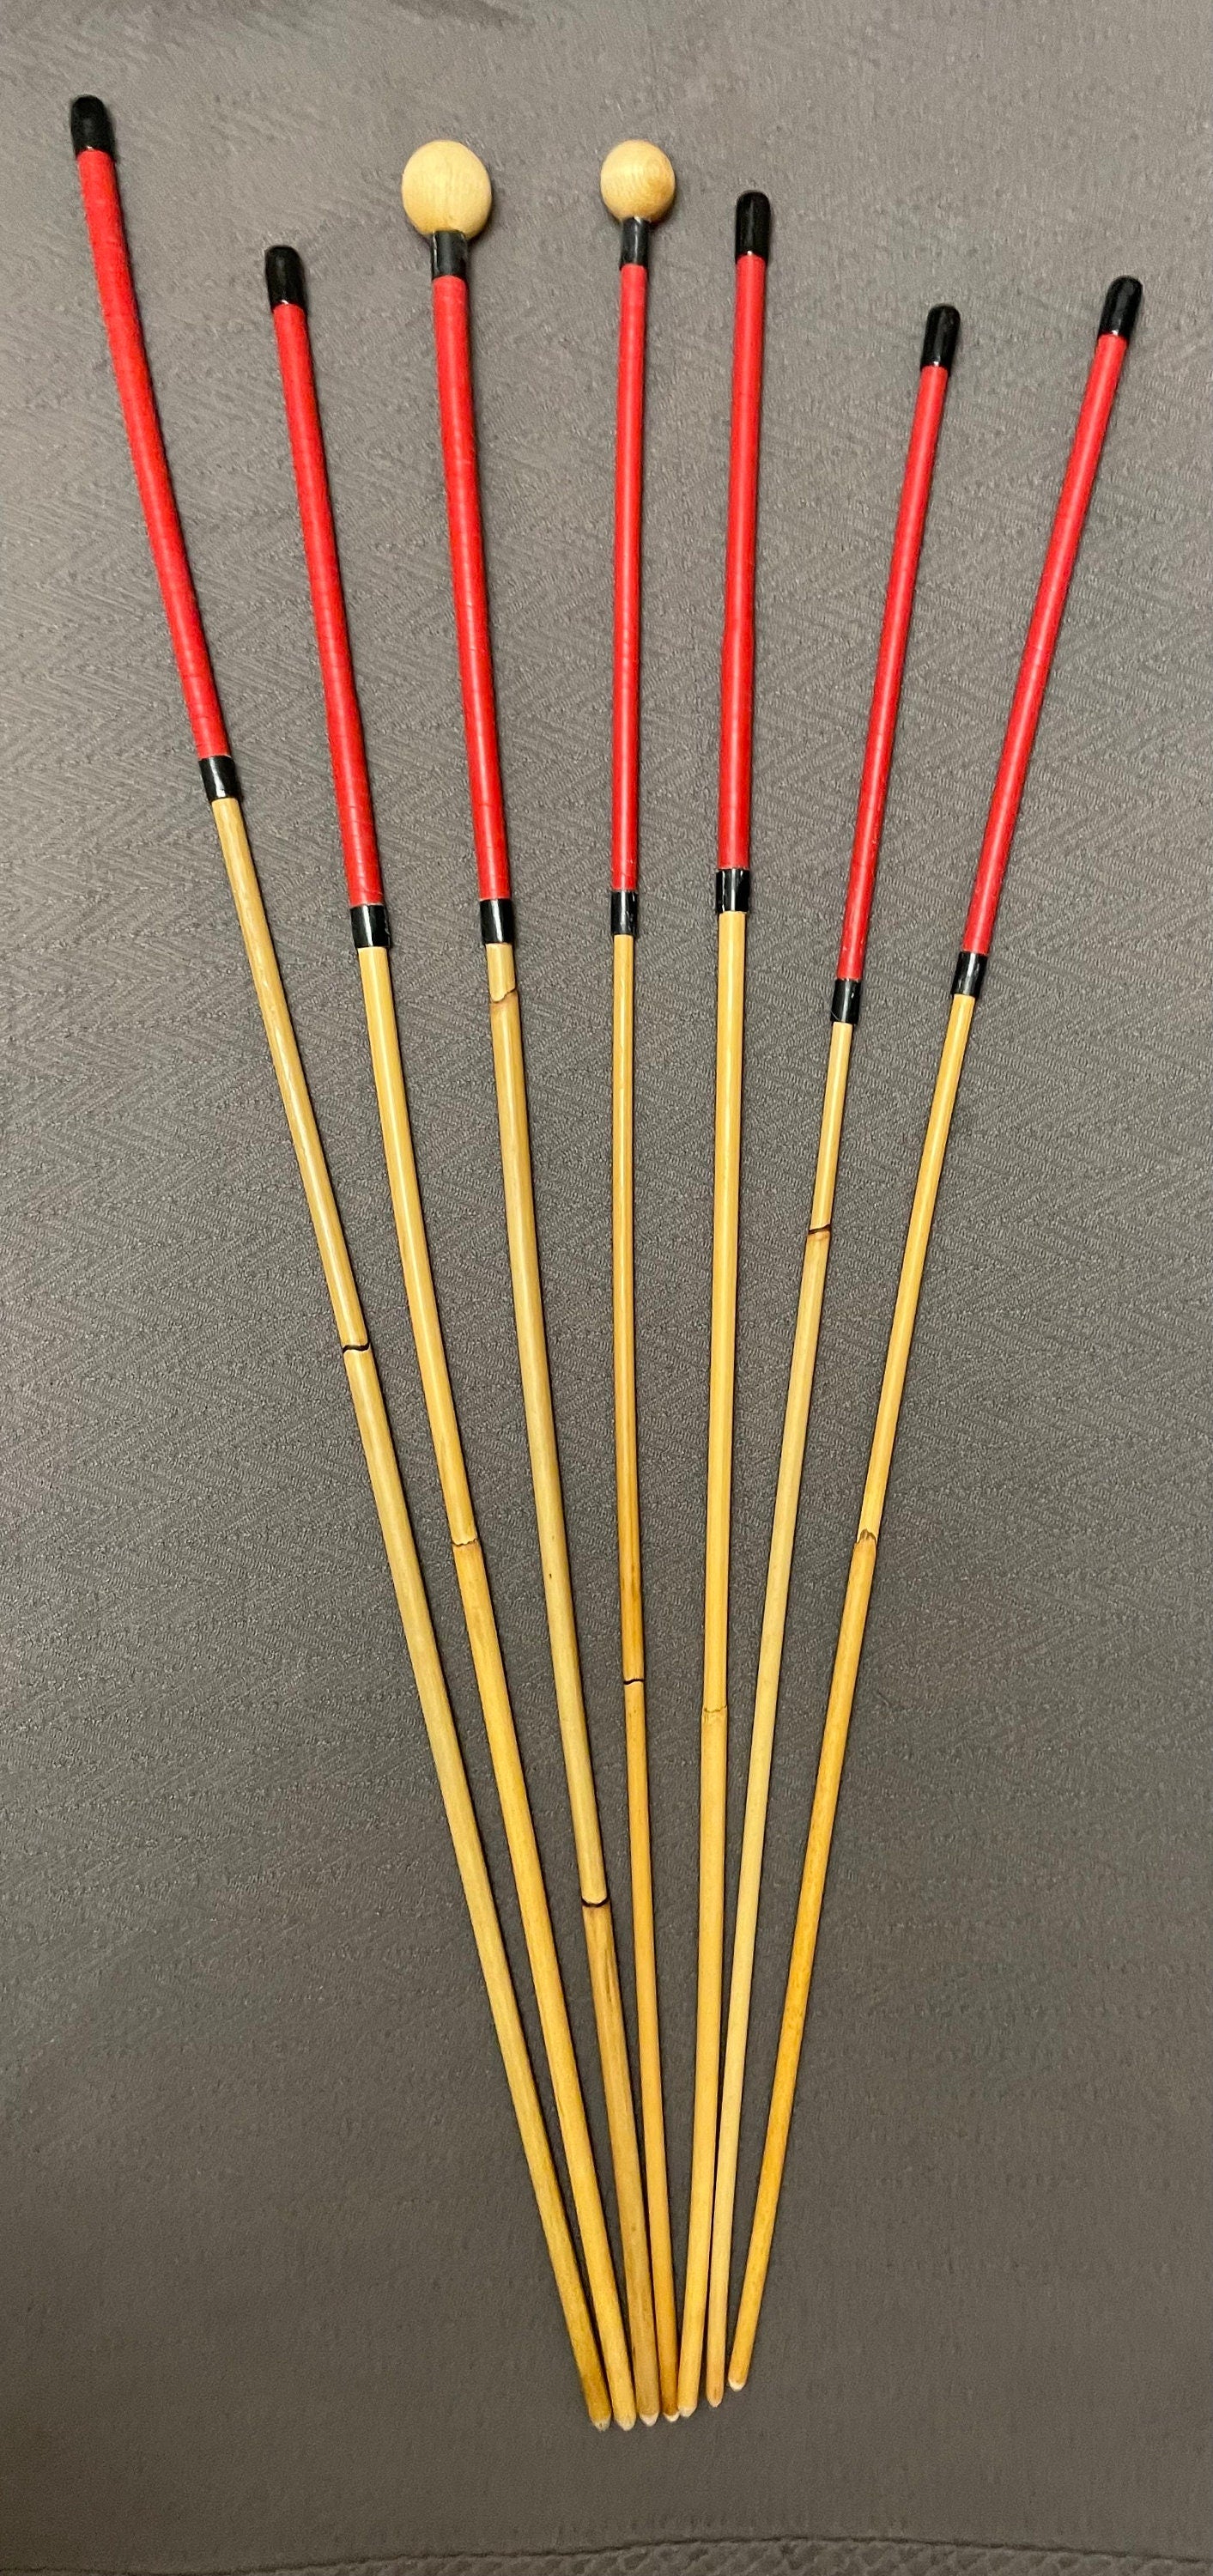 The Professional Punitrix Dungeon Set of 7 Classic Dragon Rattan Punishment Canes / School Canes / BDSM Canes - RED Roo Leather Handles